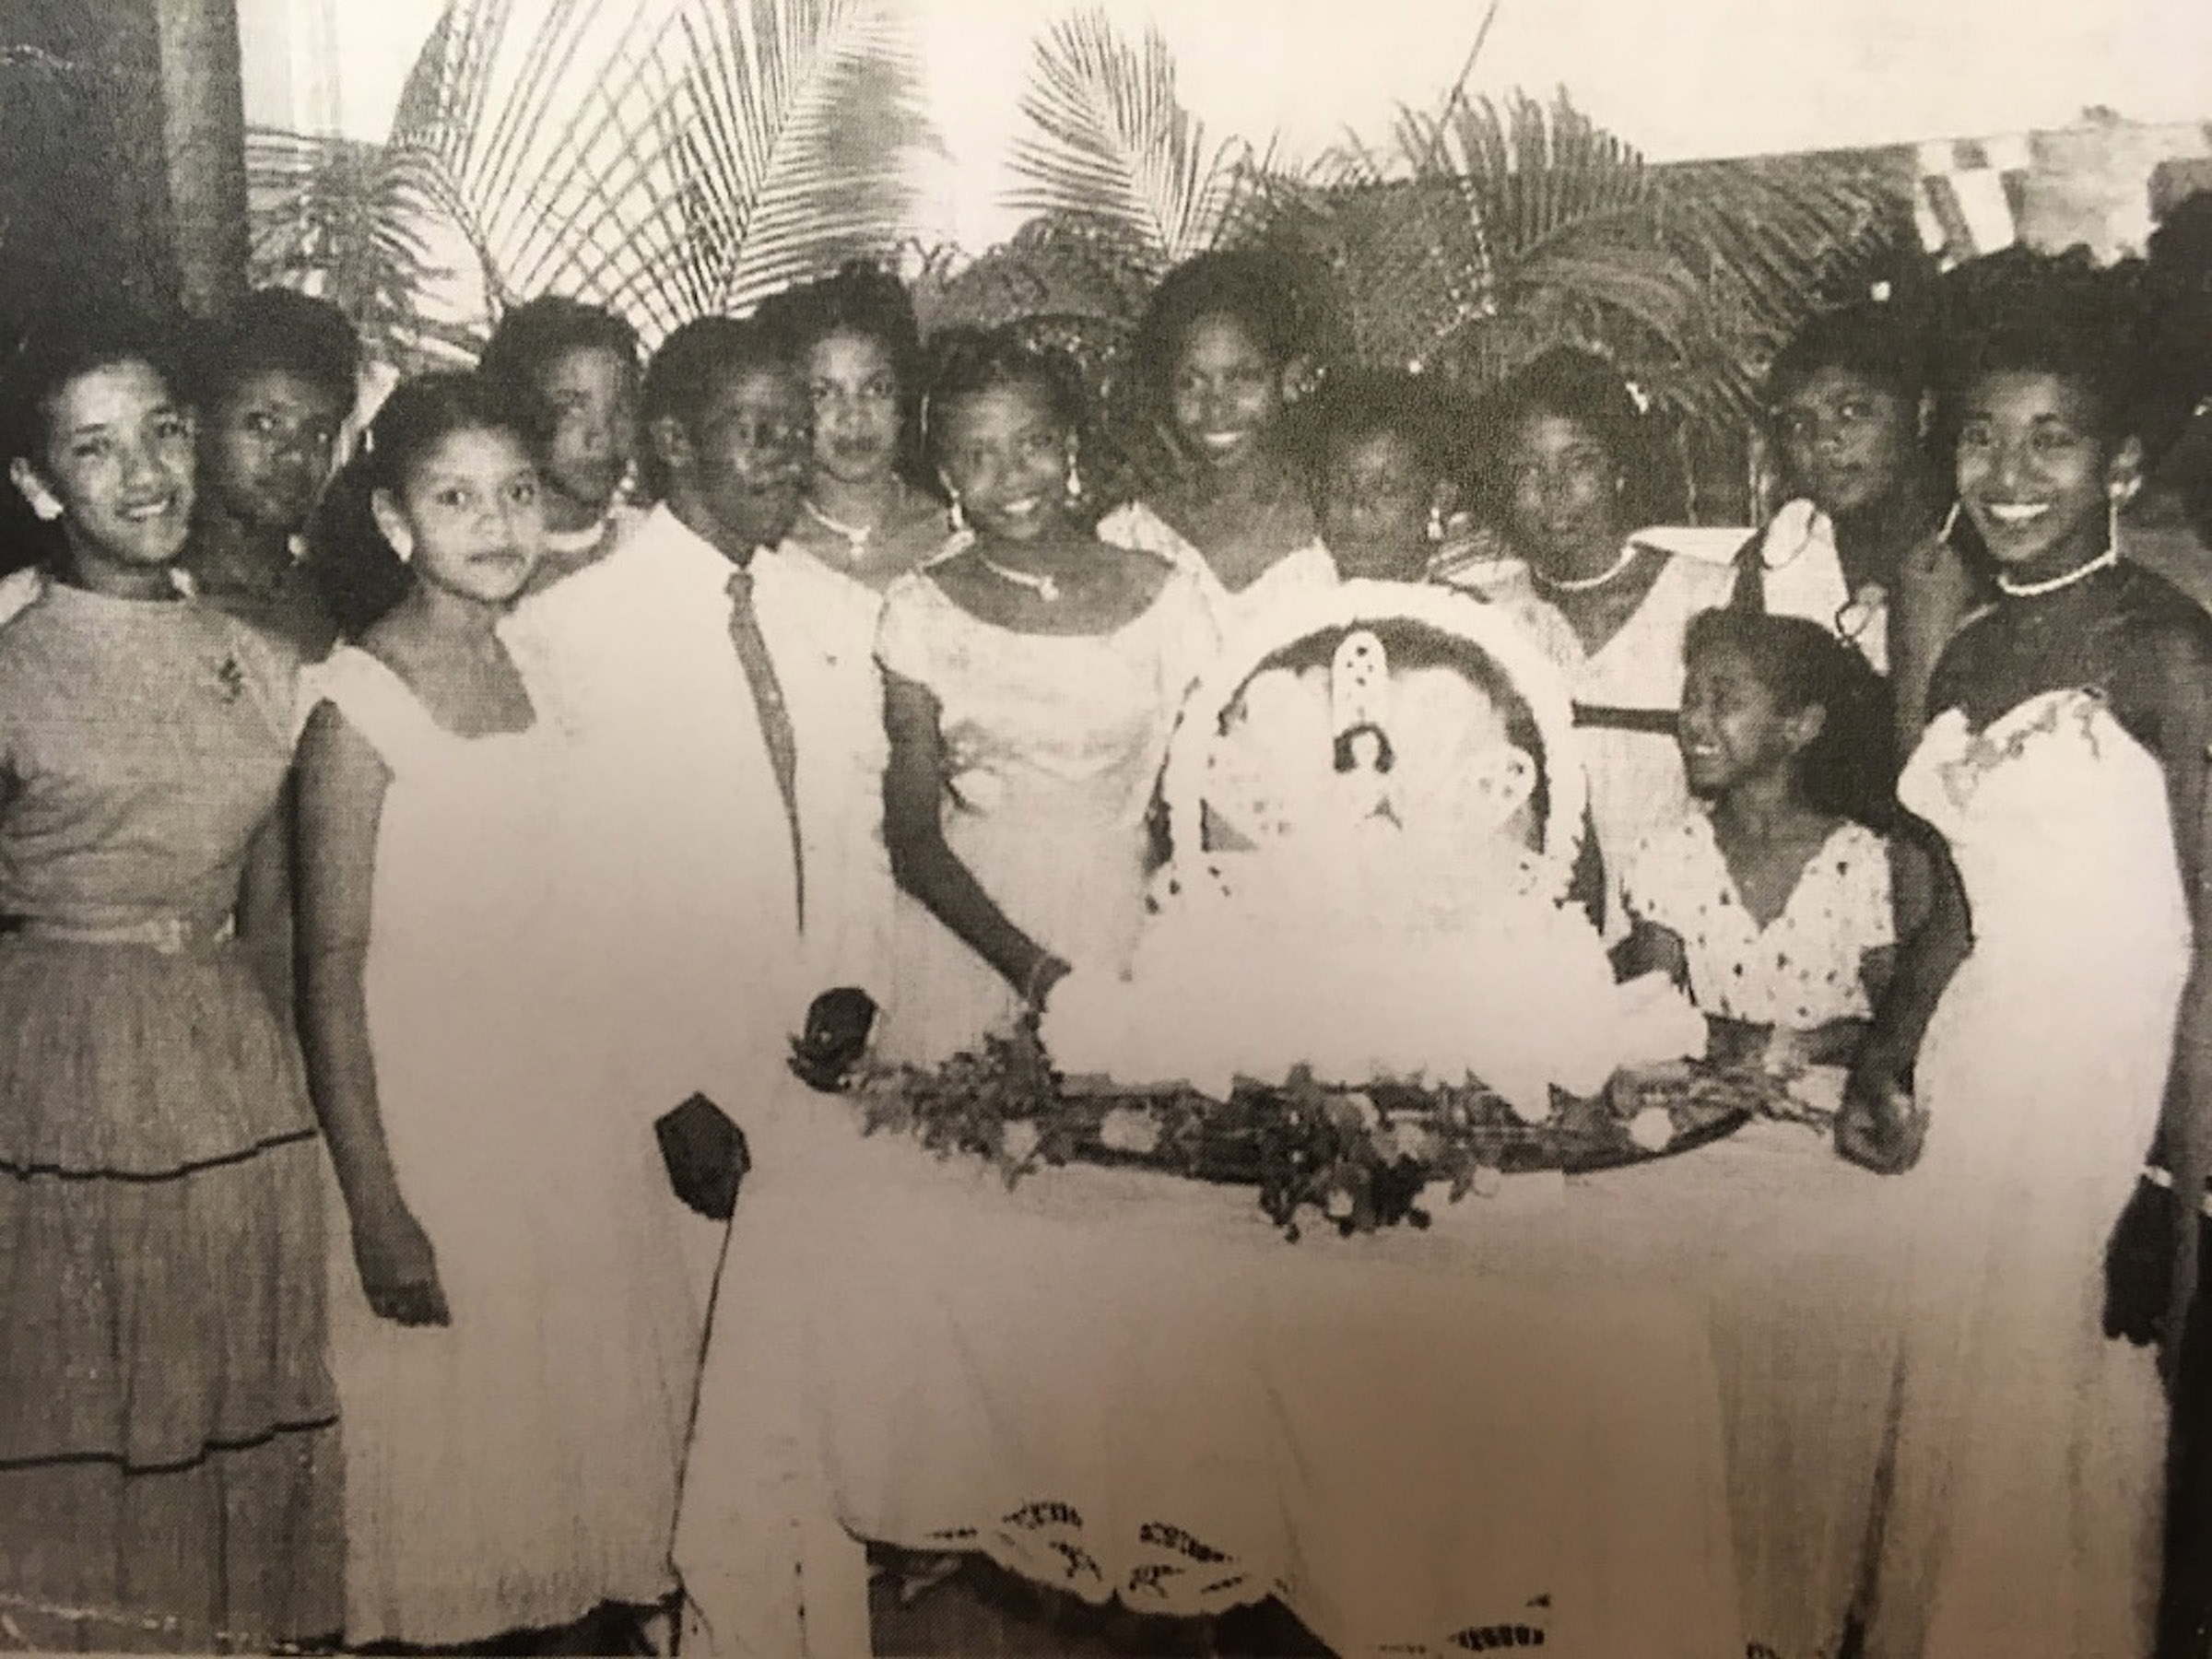 A black-and-white photo of a group of well-dressed men and women in front of a lavish cake.